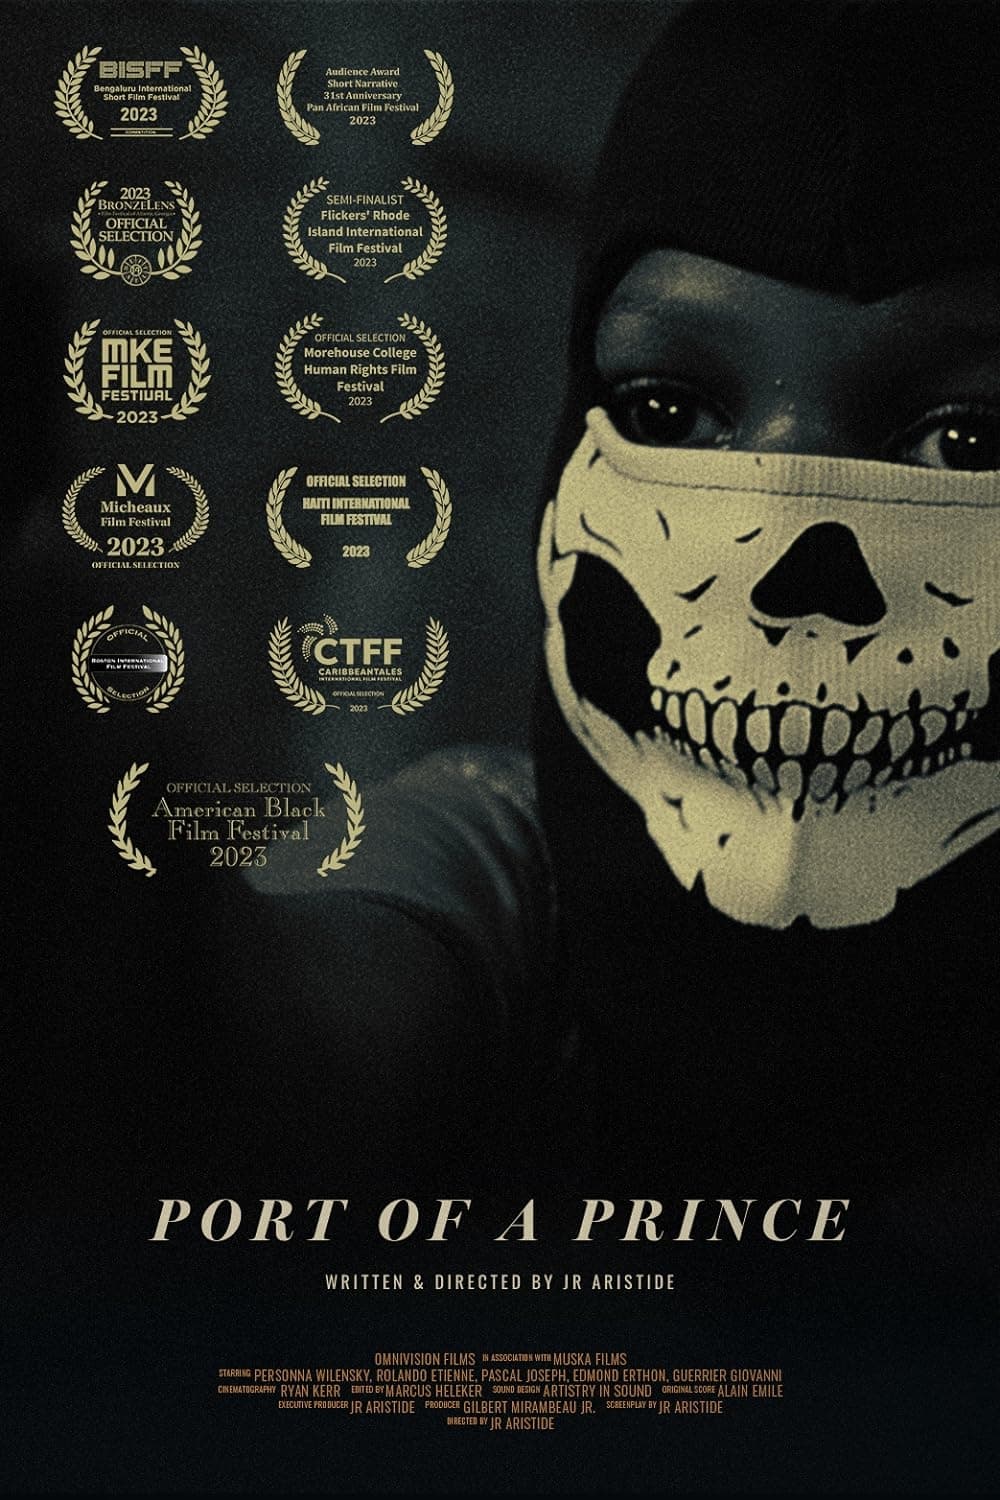 Port of a Prince